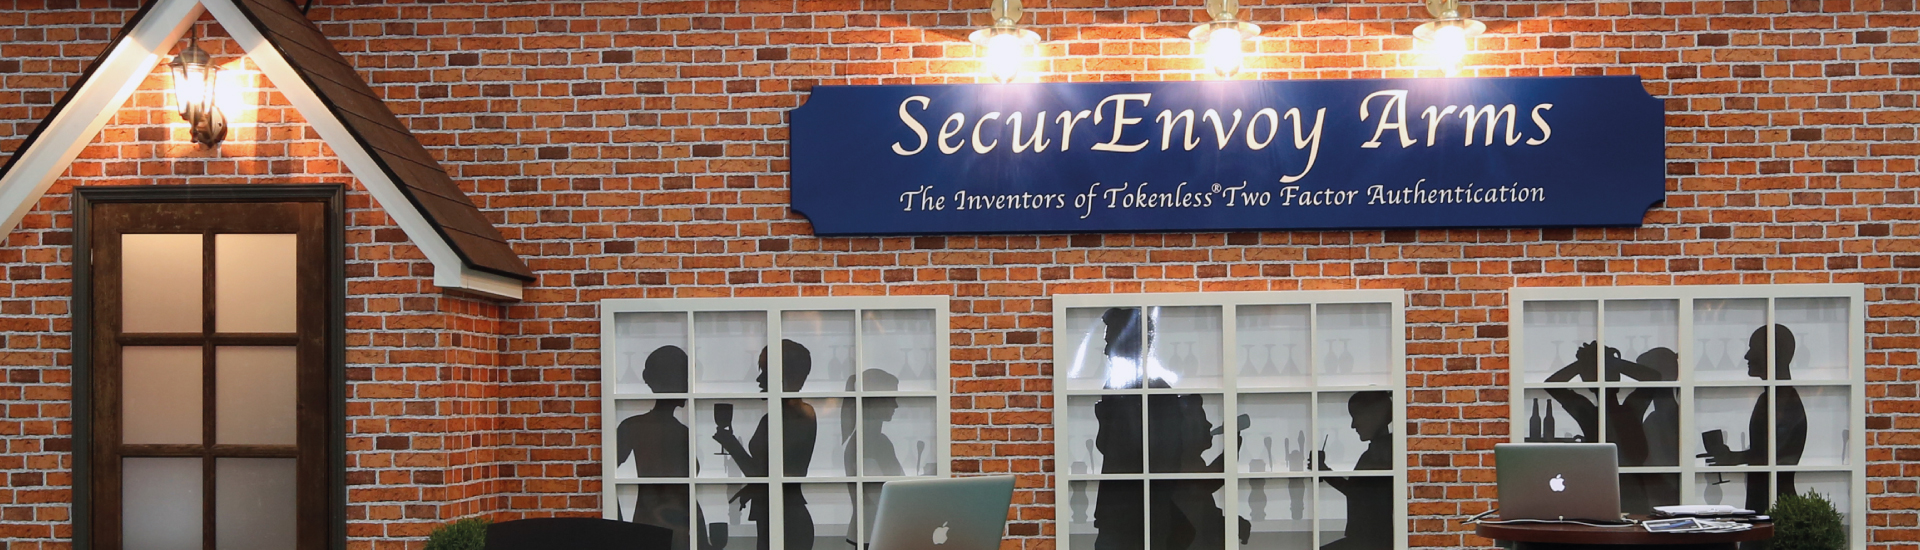 Secure Envoy Arms - Bespoke Exhibition Stand - Imagine Events